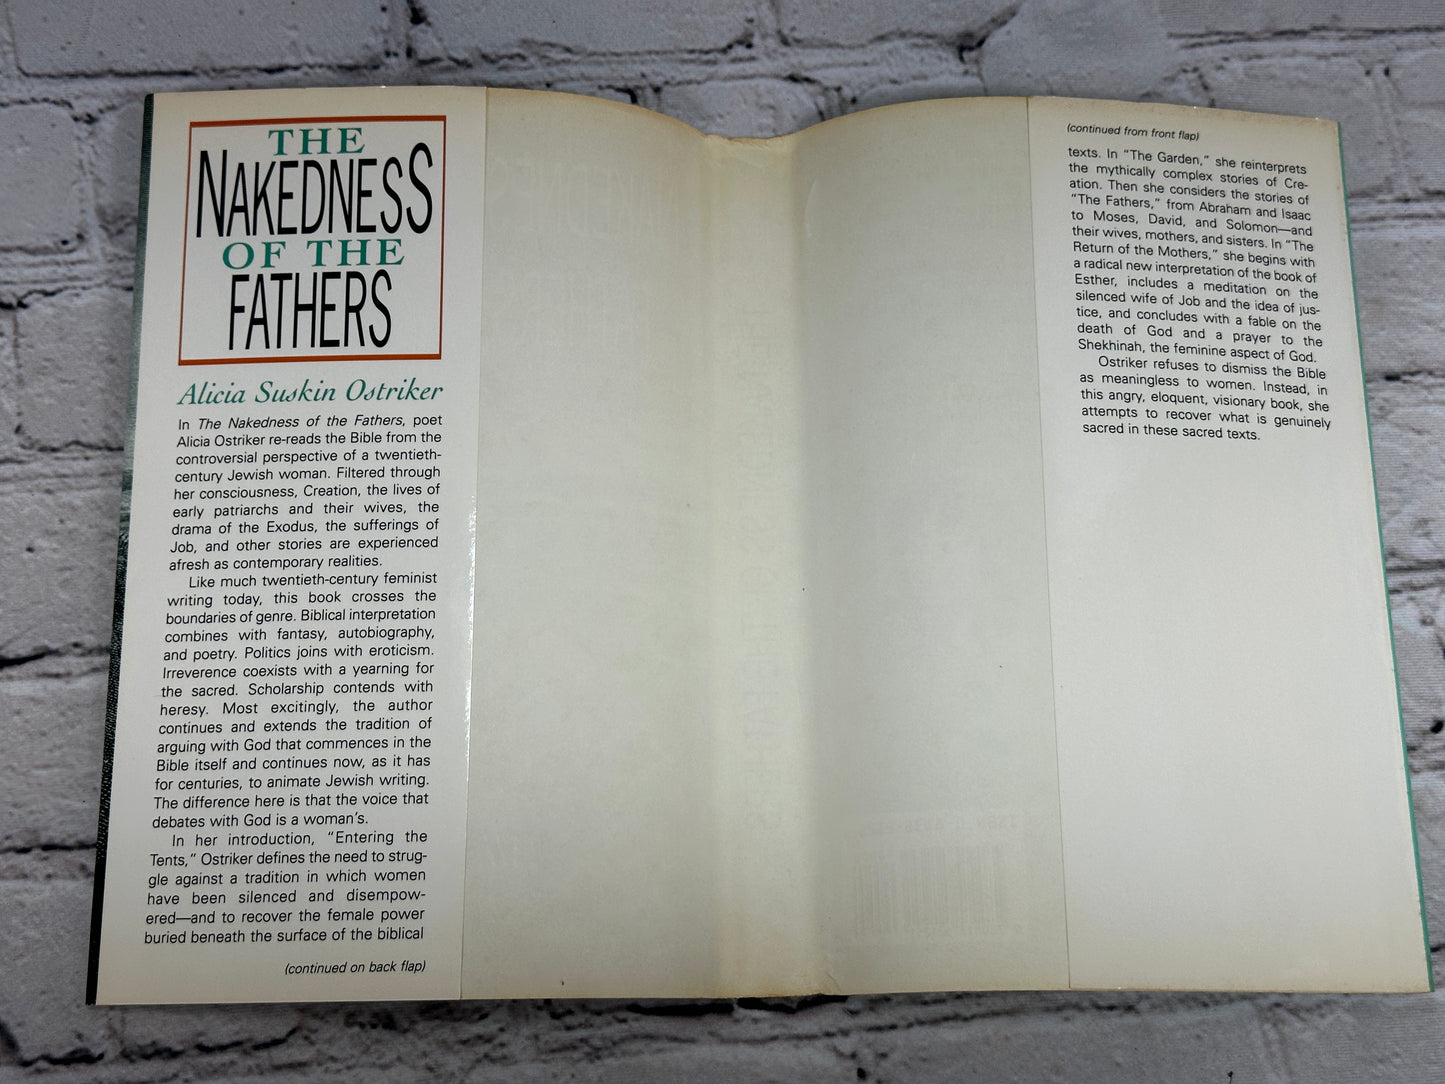 The Nakedness of the Fathers: Biblical Visions..by Alicia Suskin Ostriker [1994]